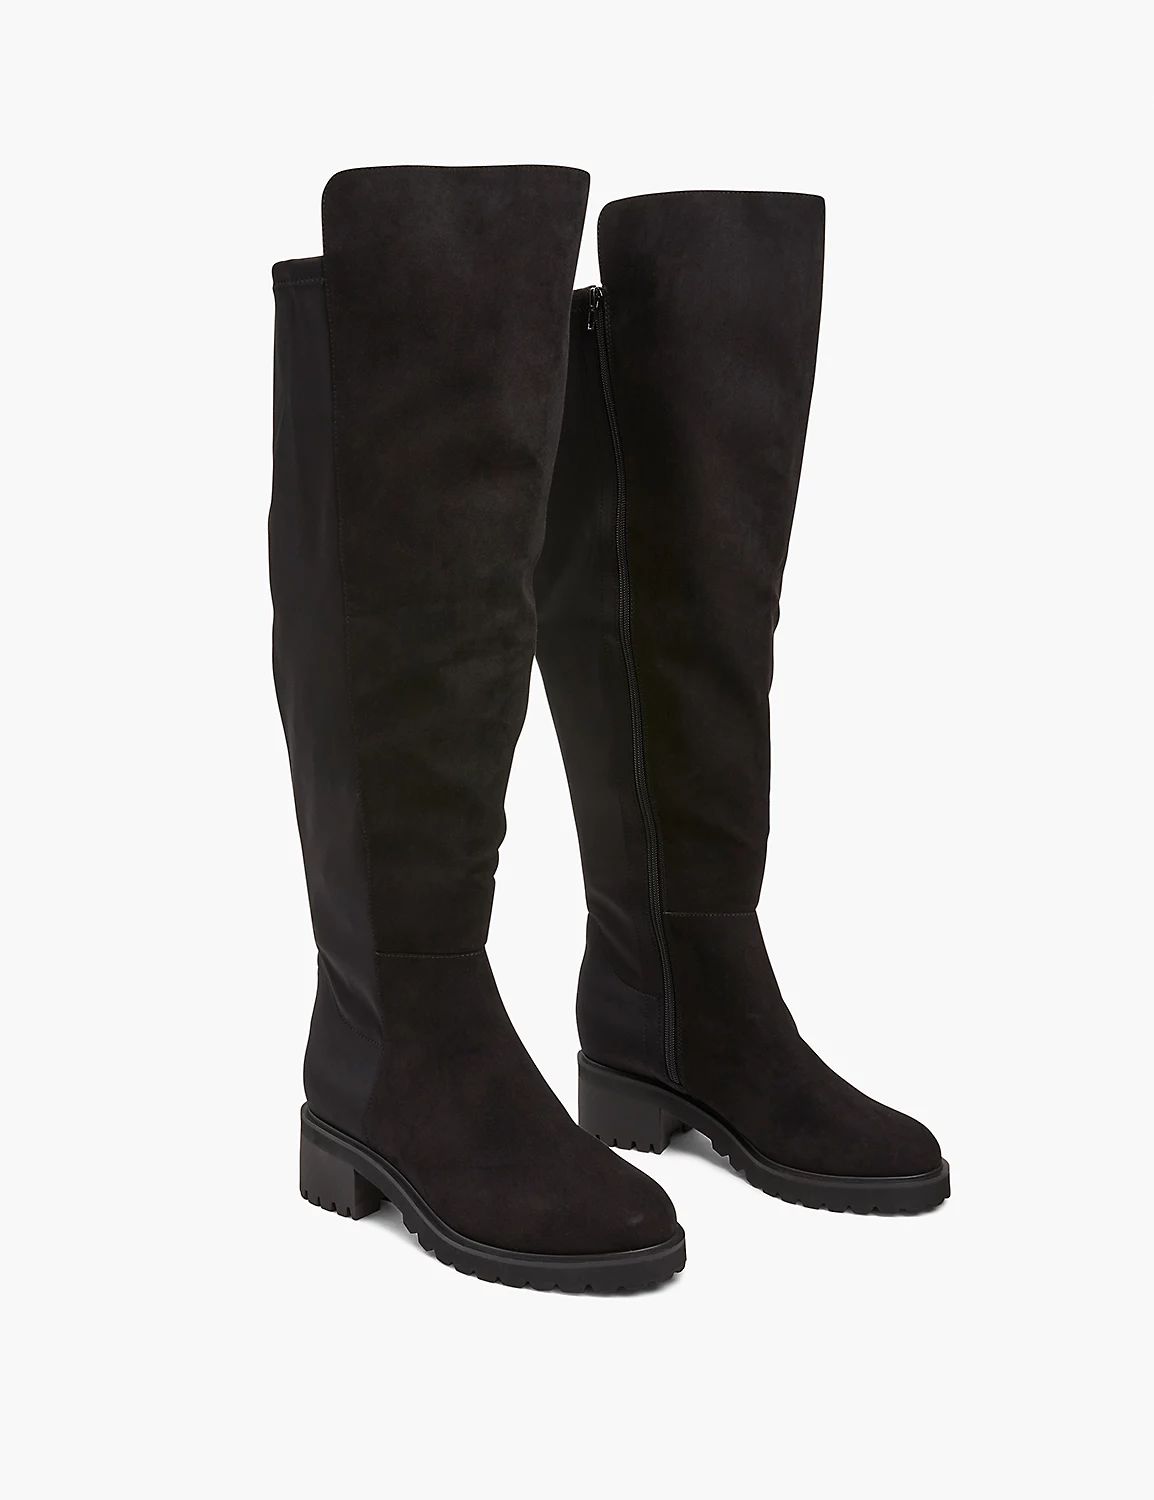 Dream Cloud Faux-Microsuede Over-The-Knee Boot | LaneBryant | Lane Bryant (US)